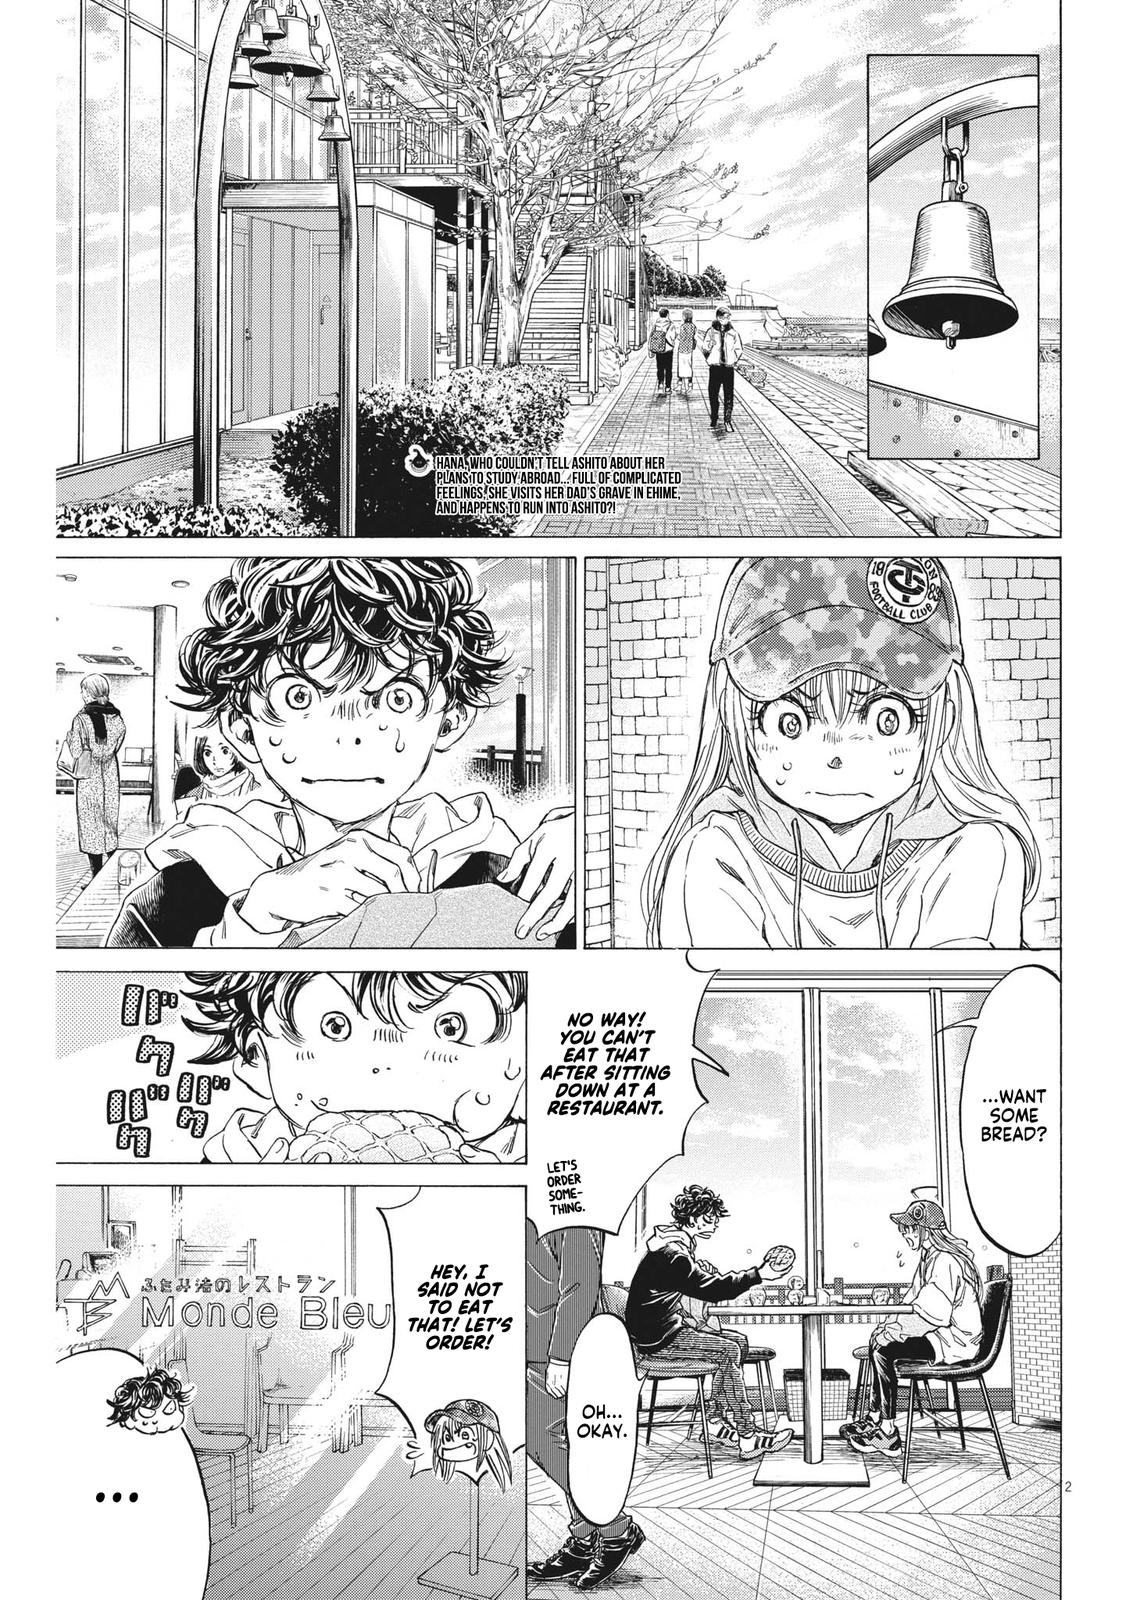 Ao Ashi, Chapter 321 | TcbScans Org - Free Manga Online in High 